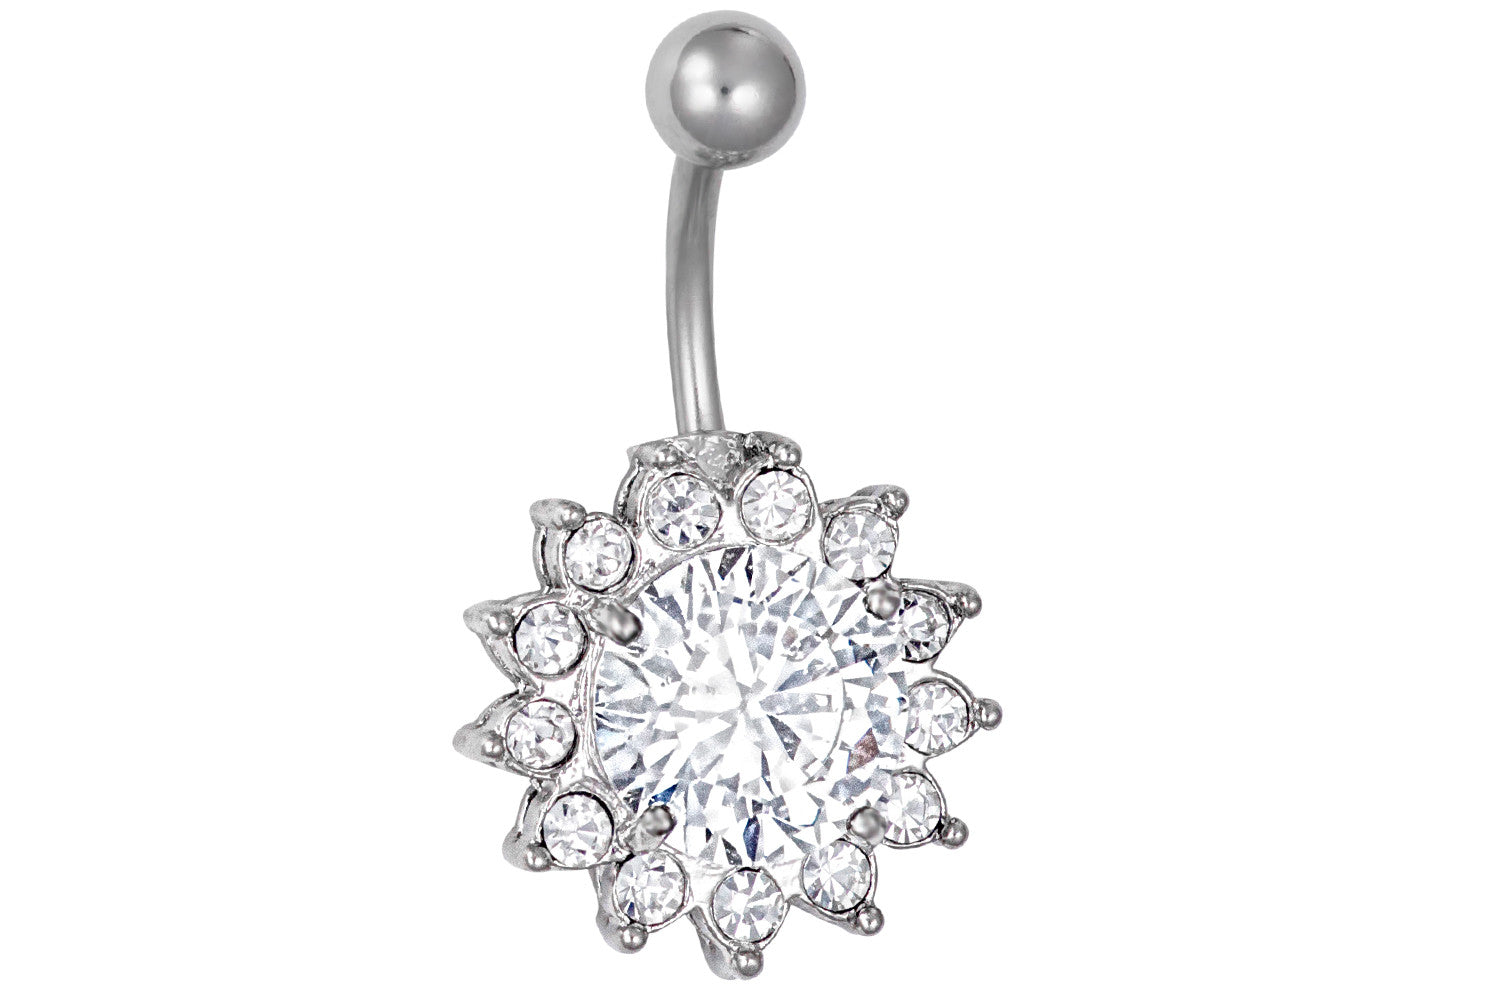 Our large crystalline CZ belly button ring is made with surgical grade 316L stainless steel & Cubic Zirconia simulated diamond crystals. The solitaire crystal measures 7/16" across and the total diameter is 11/16". This 14 gauge body jewelry is hypoallergenic and nickel free.